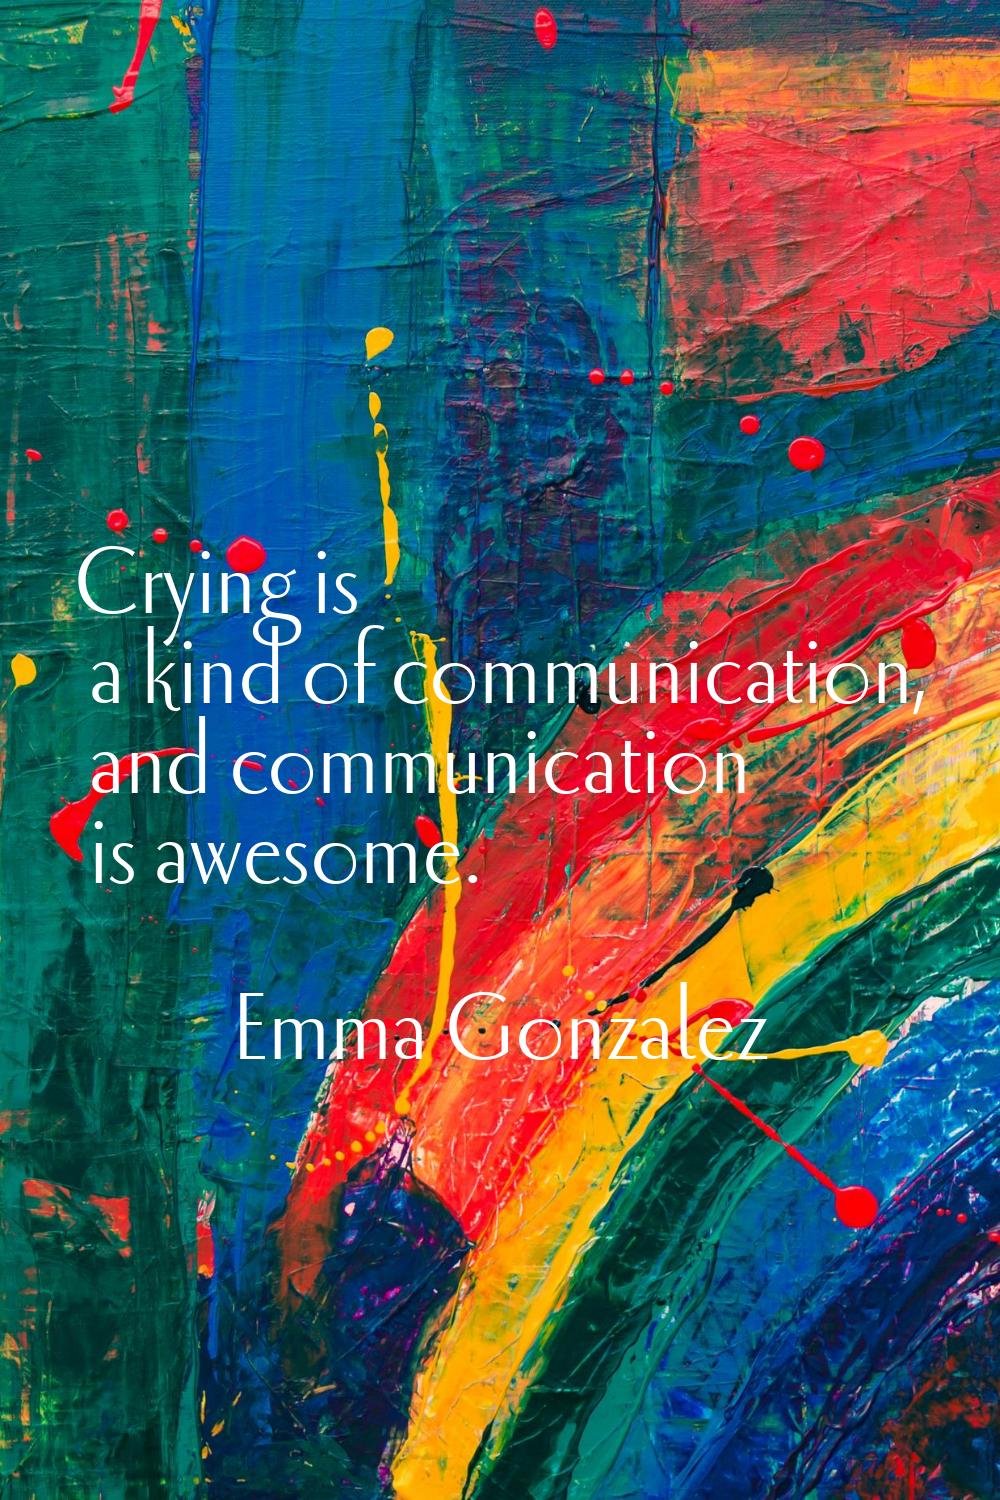 Crying is a kind of communication, and communication is awesome.